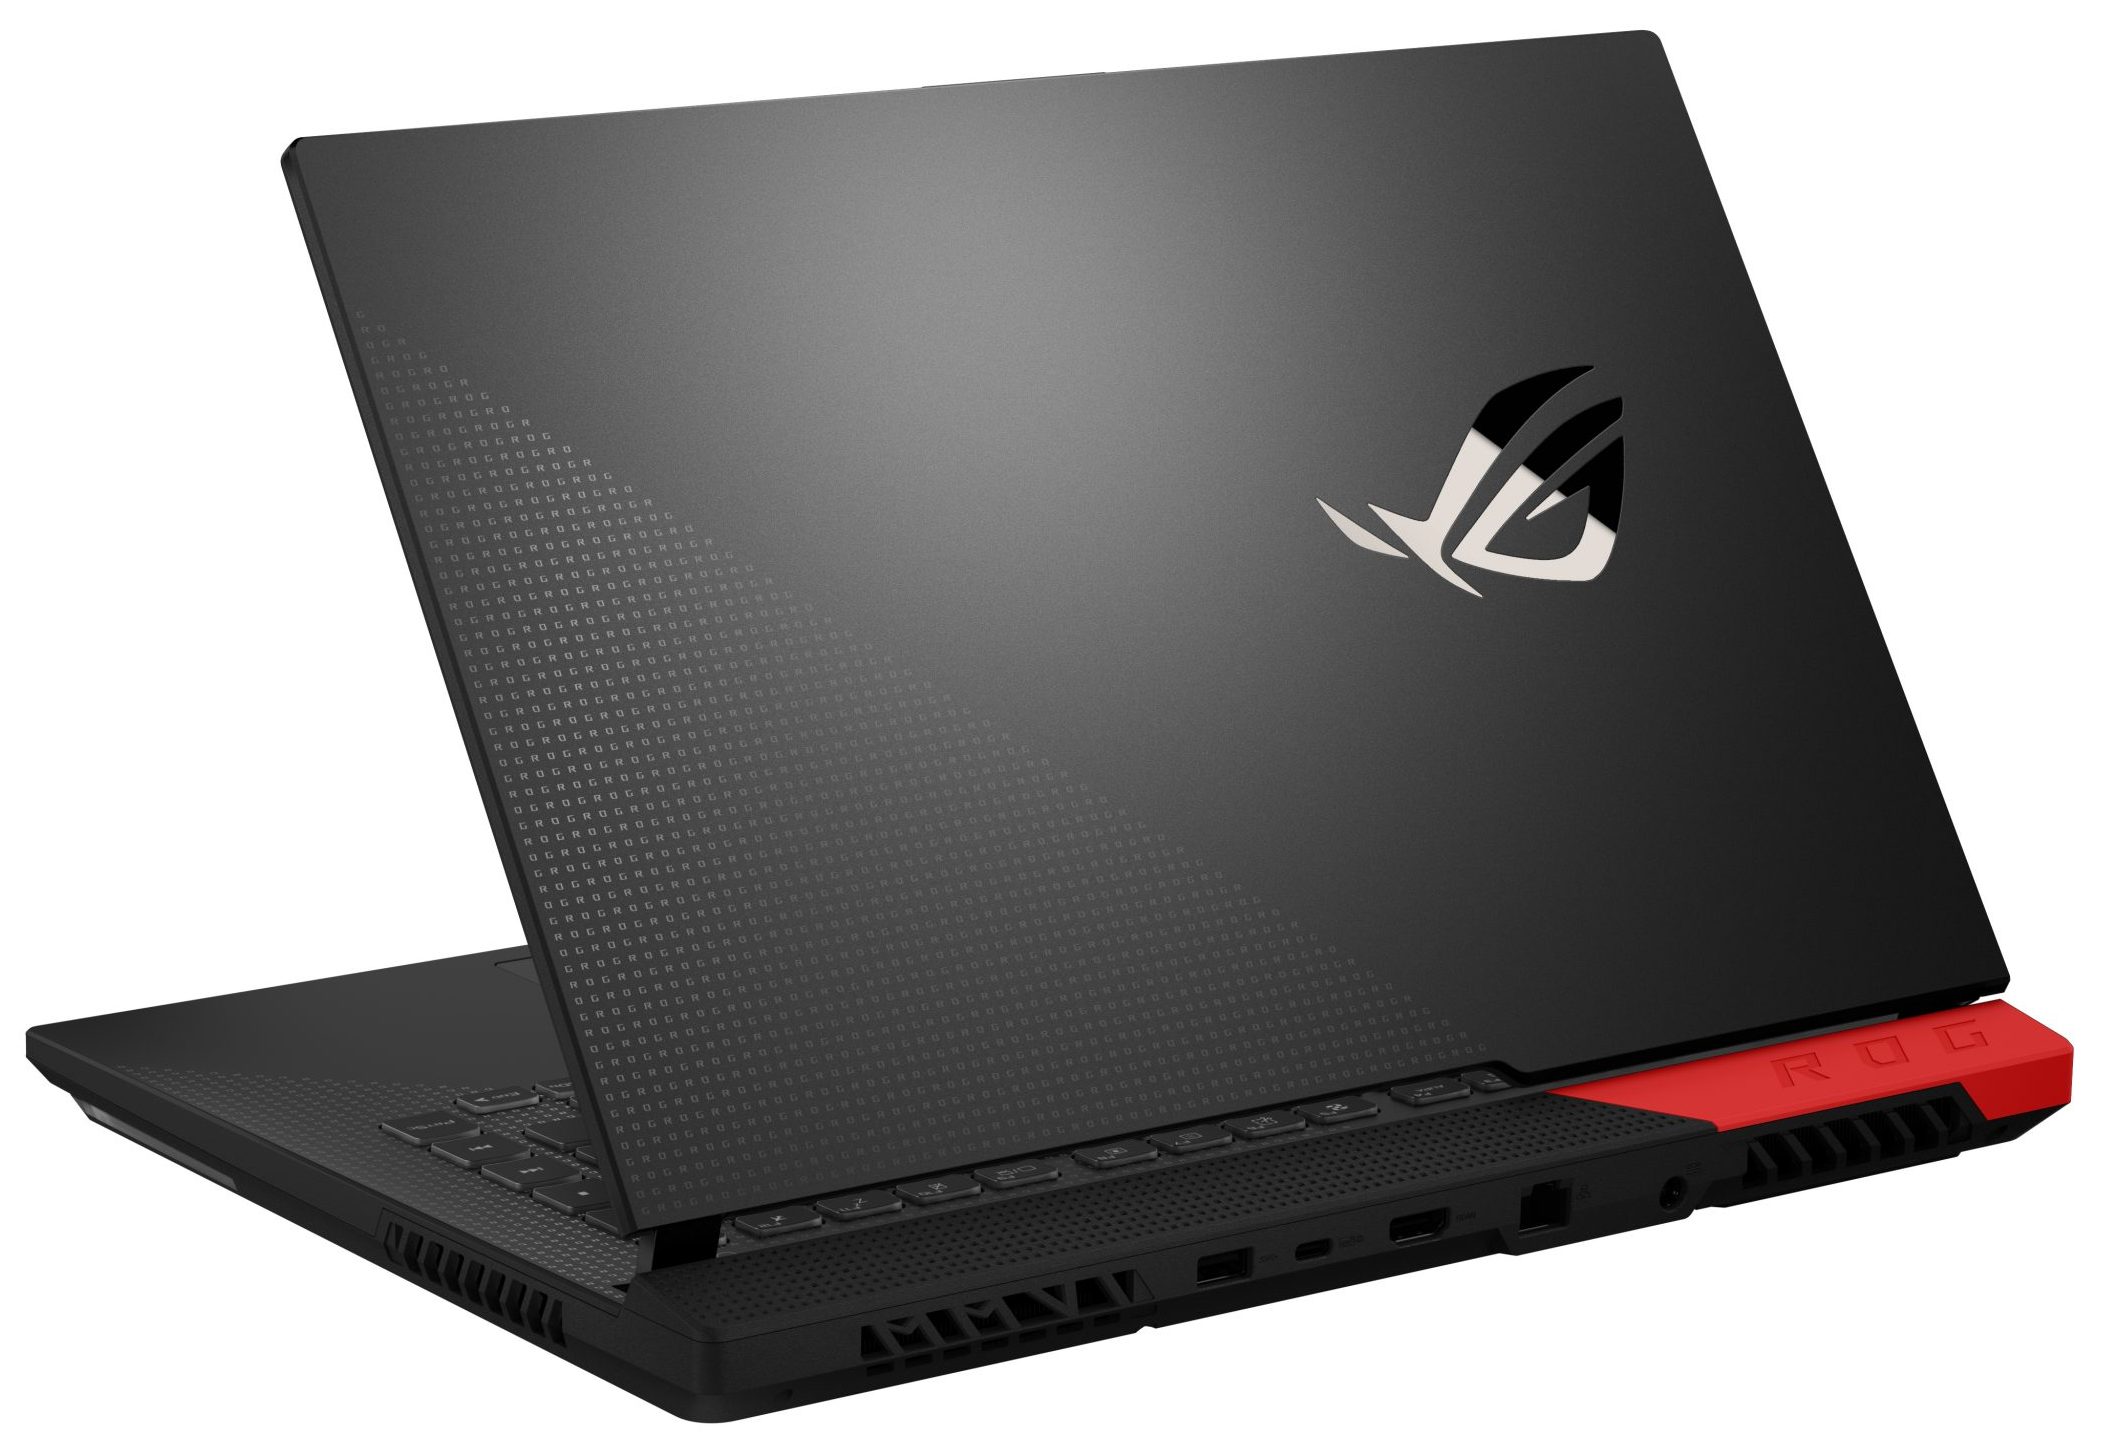  ASUS 15.6 ROG Strix G15 Laptop - AMD Ryzen 7 4800H - GeForce  RTX 3060 – Win 11 Home-with HDMI Cable (32GB RAM